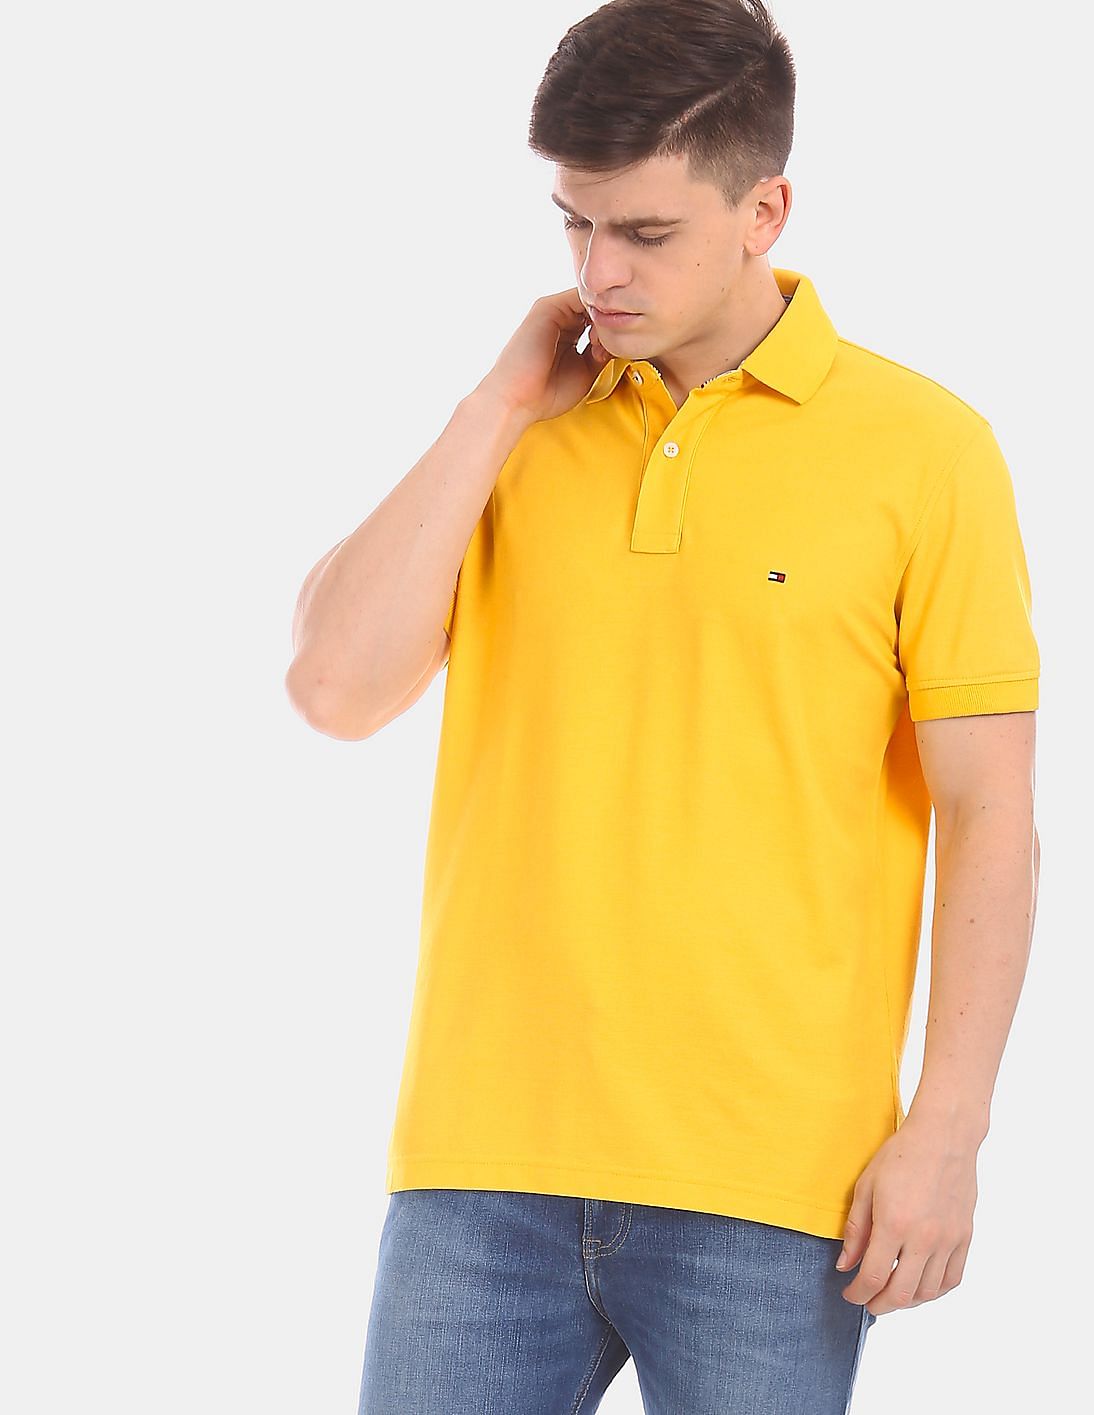 Buy Tommy Hilfiger Men Yellow Regular Fit Solid Polo Shirt - NNNOW.com